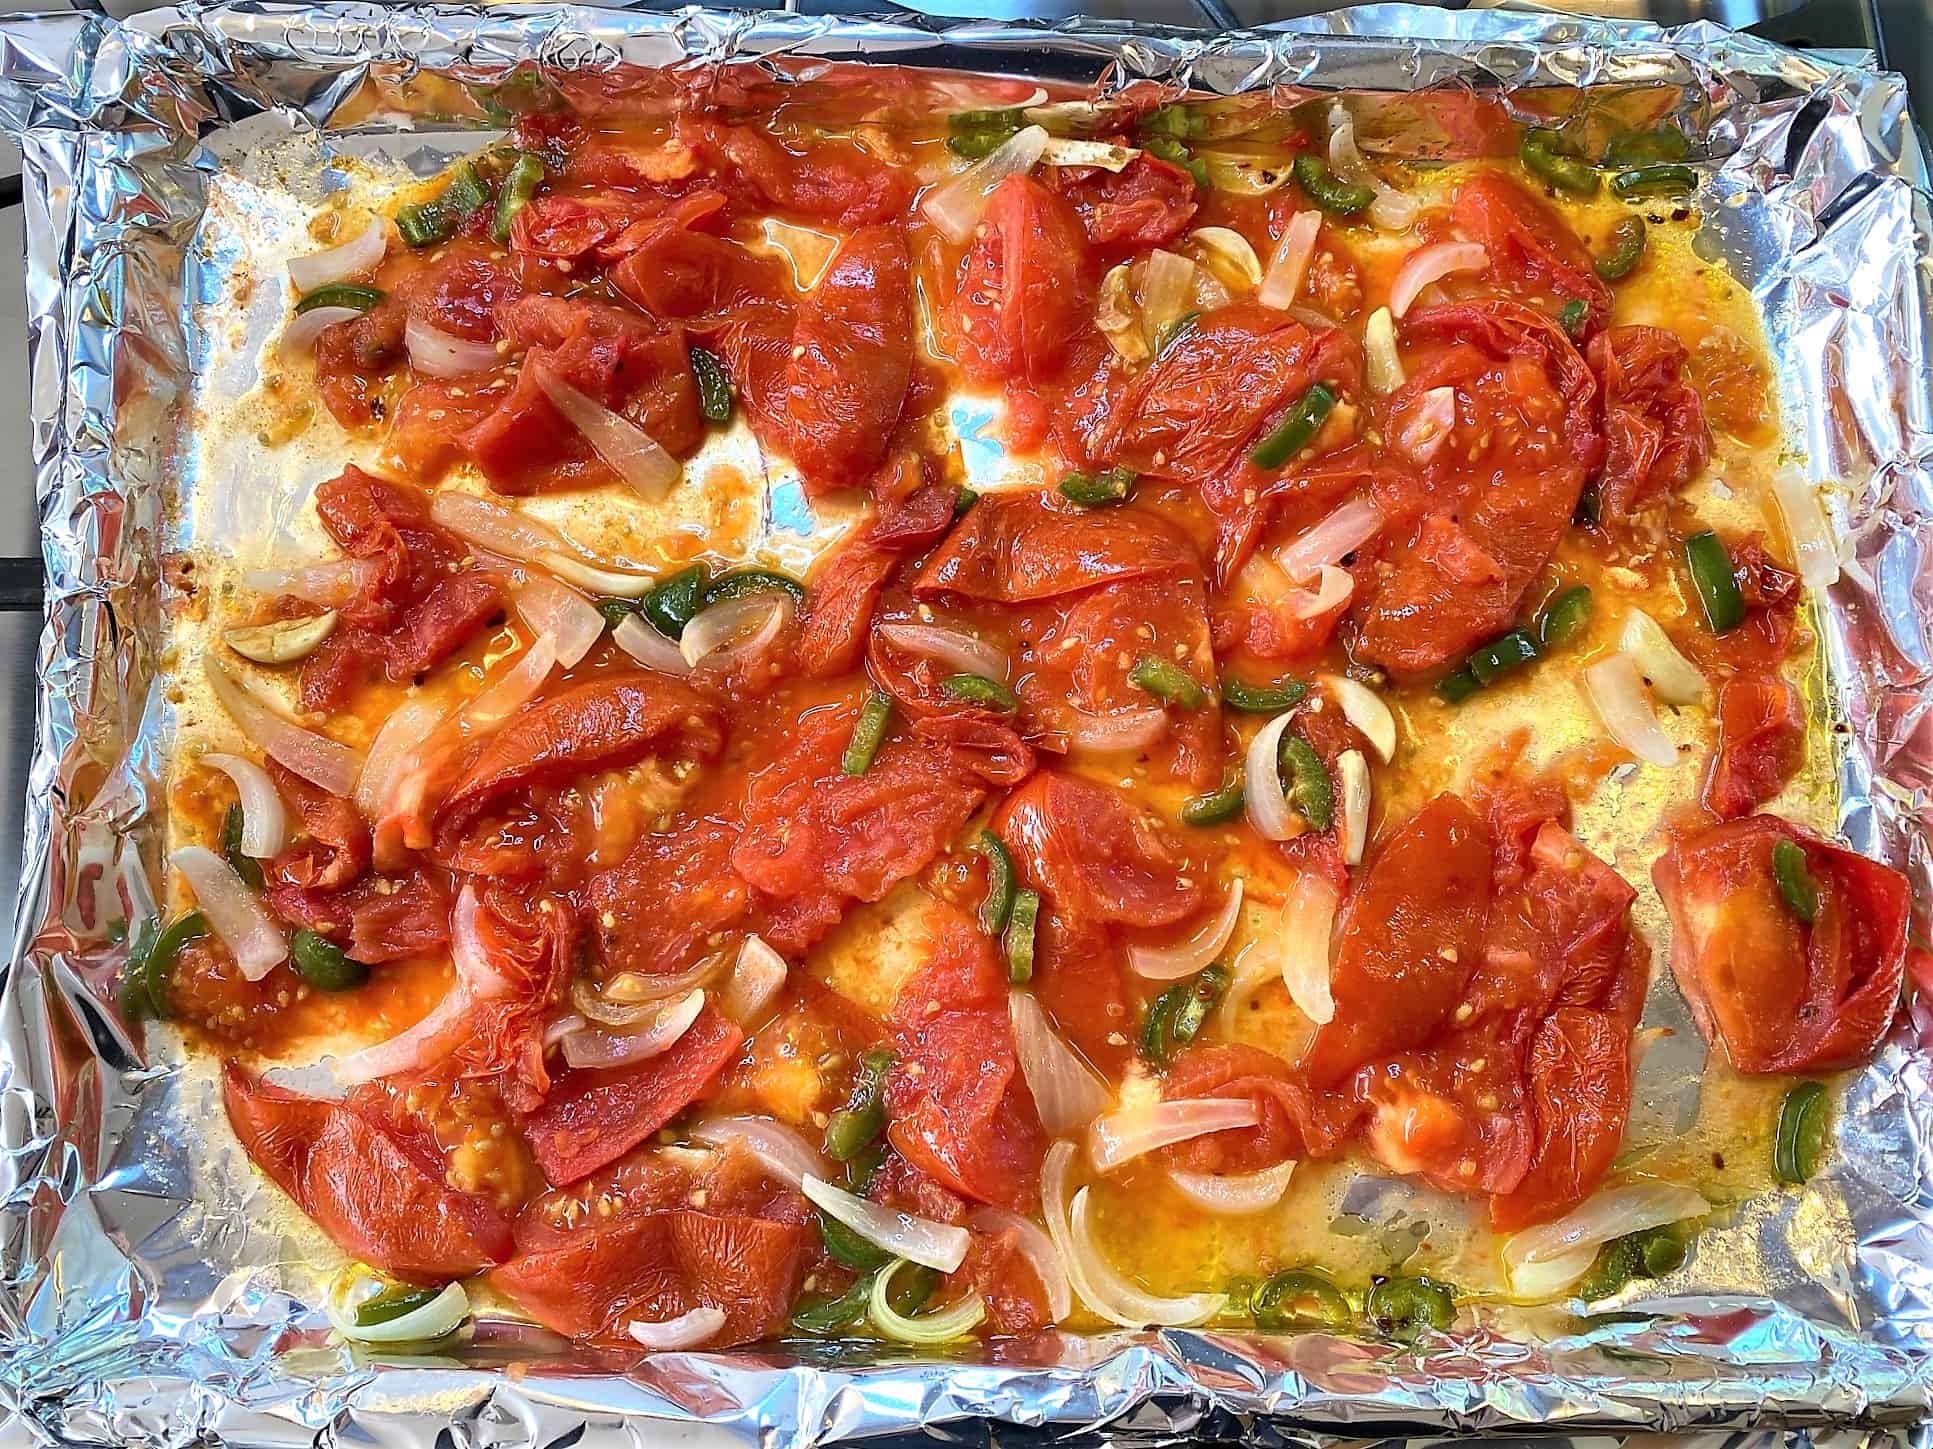 Smashed tomatoes mixed with green peppers, onions, garlic, and seasonings